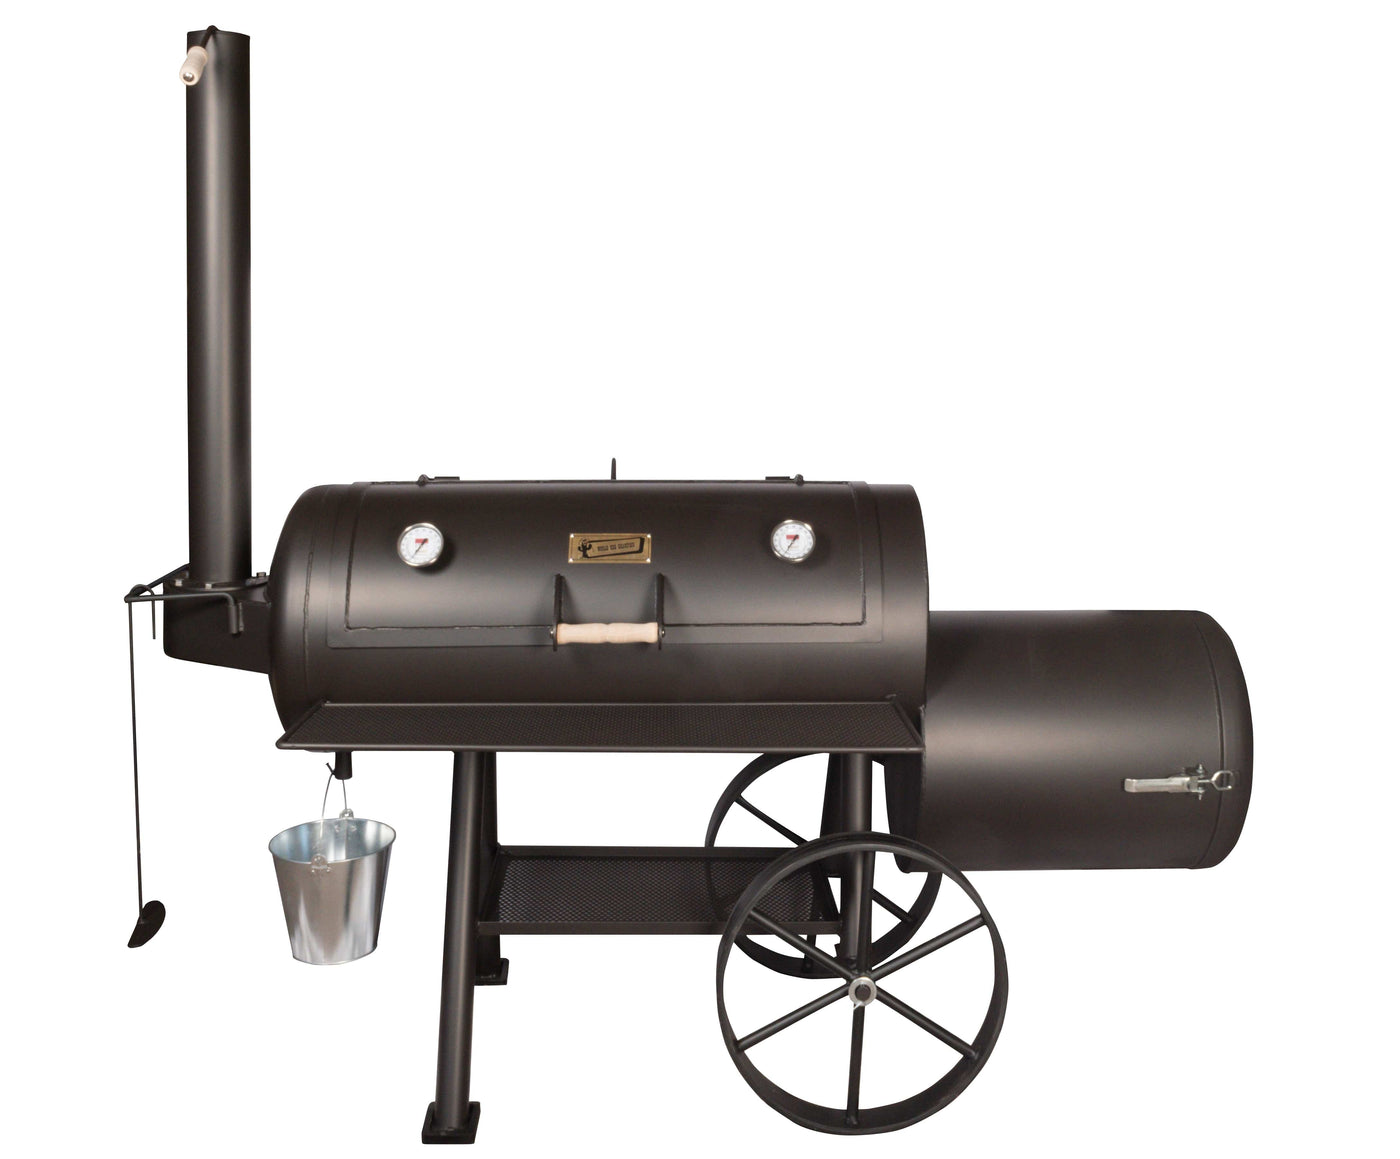 Cactus Jack 20inch Texas Special Offset Smoker front